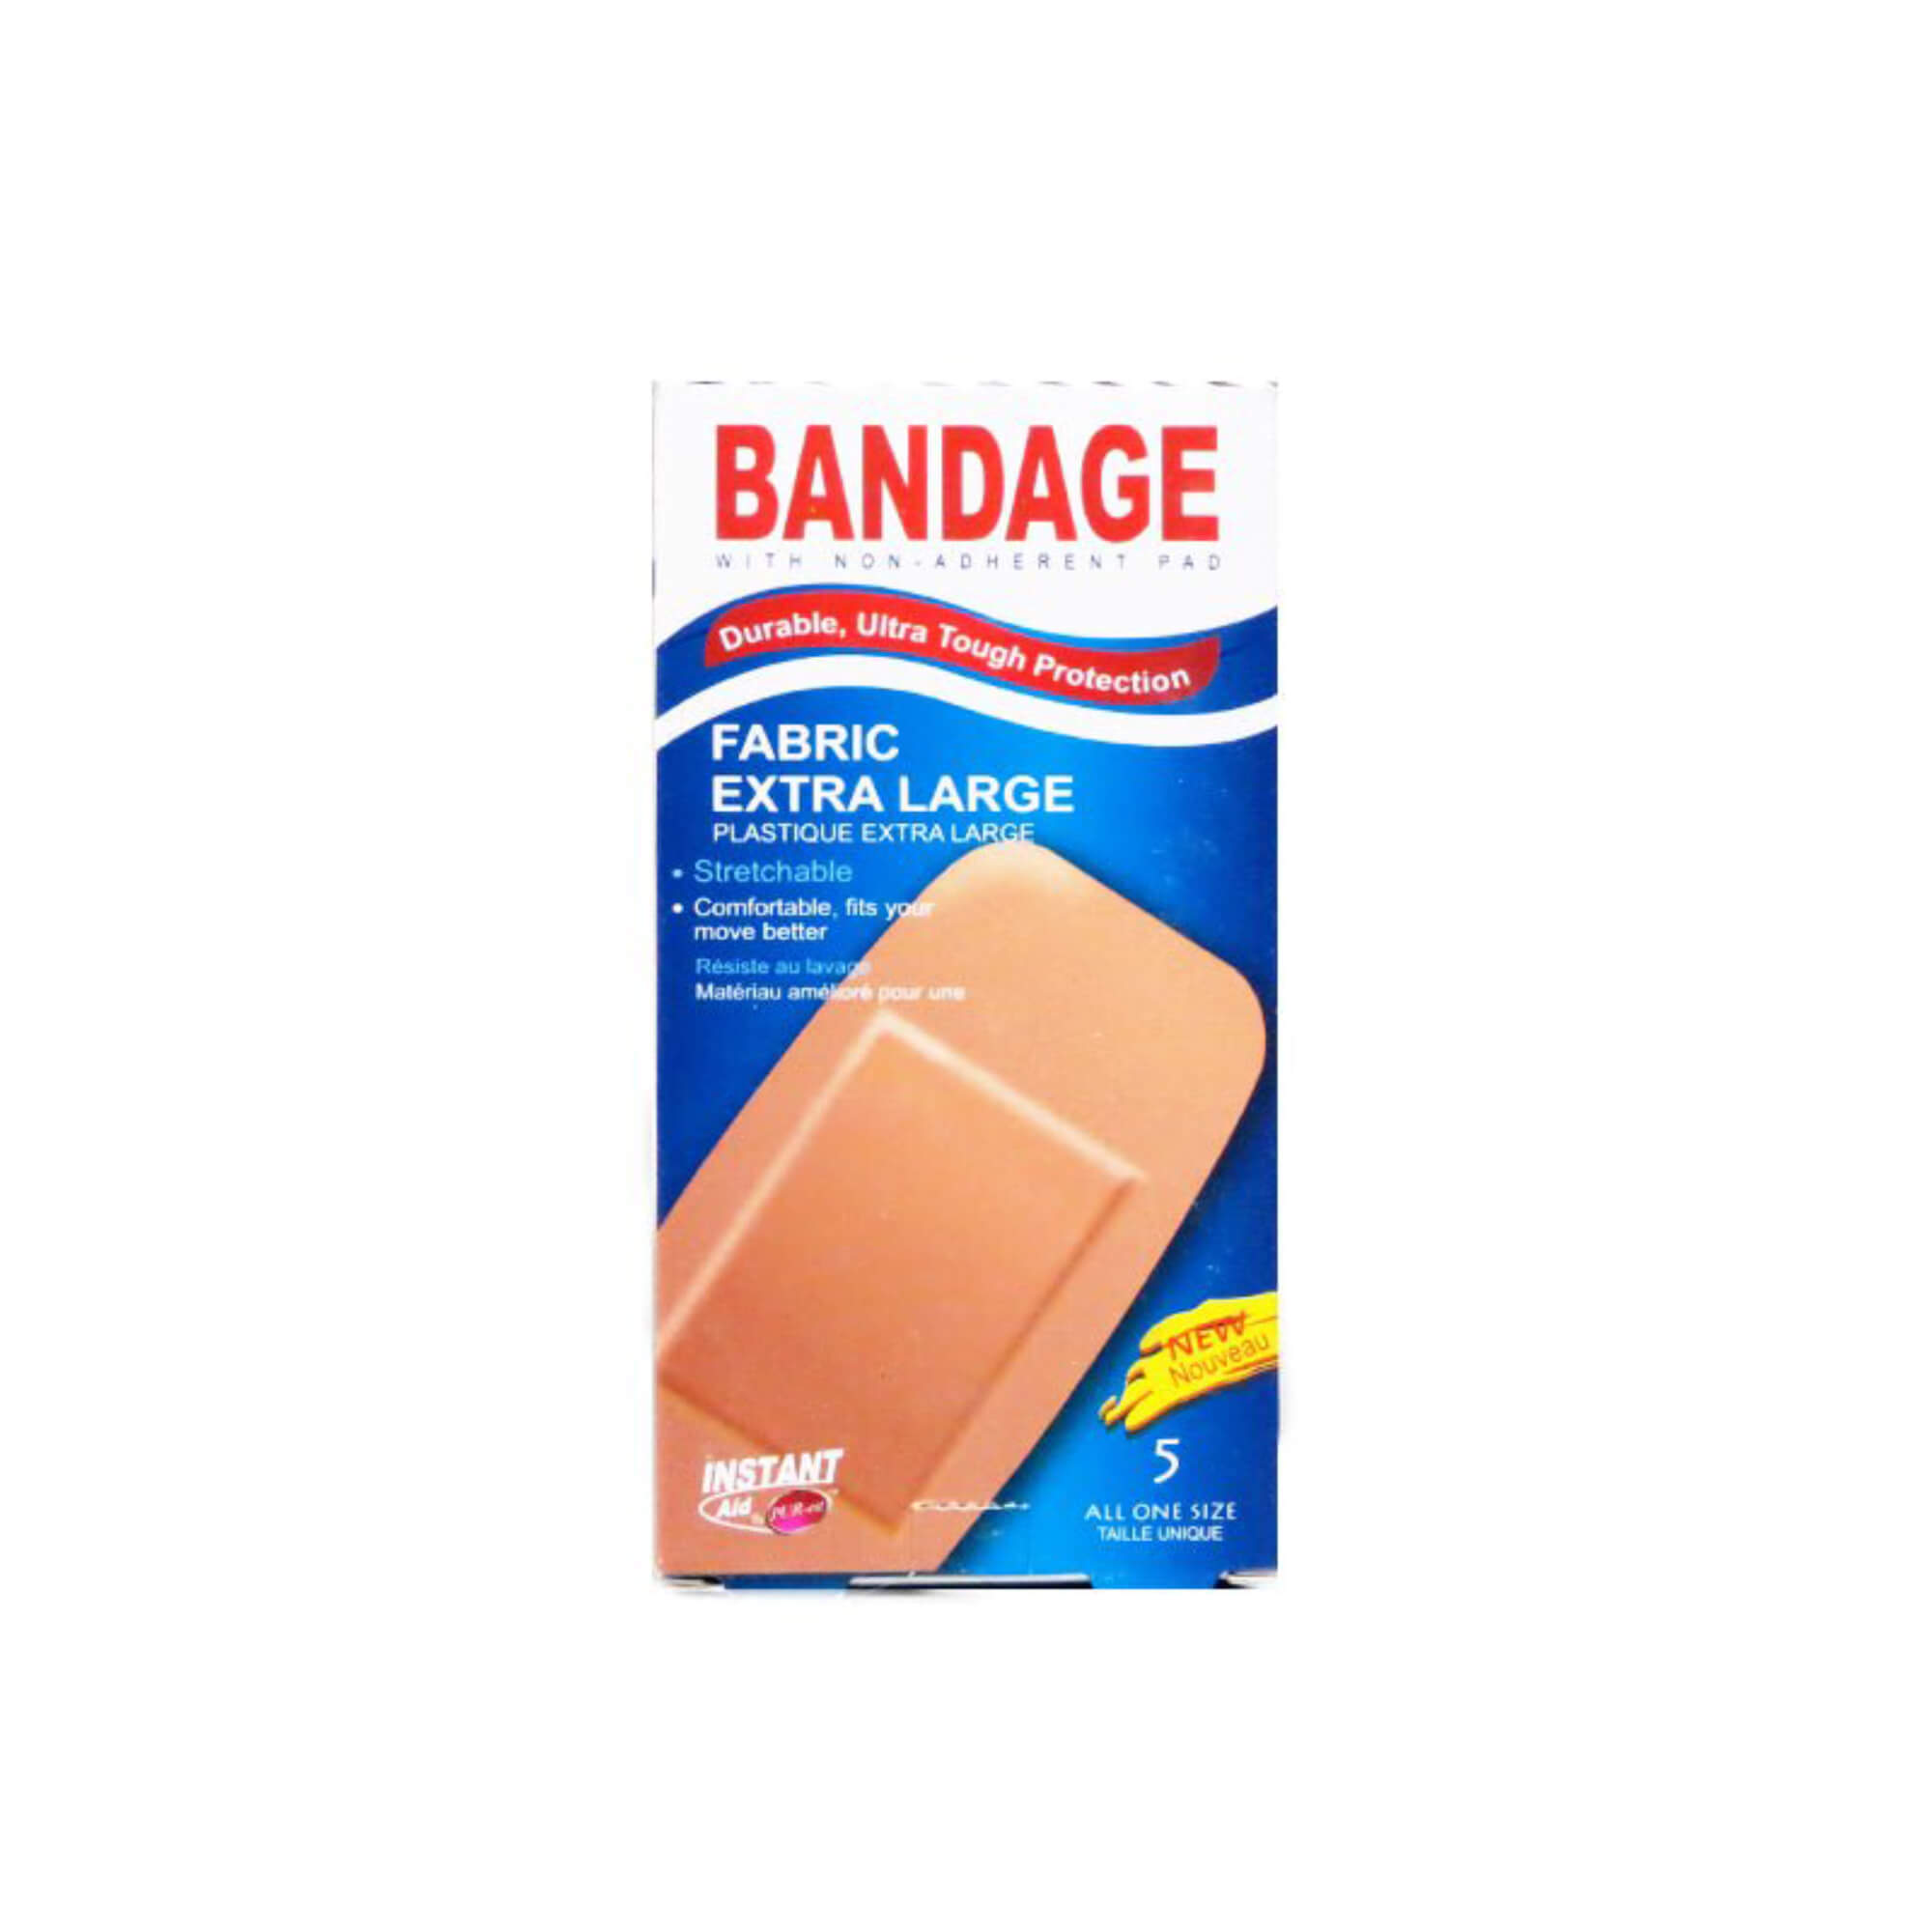 Instant Aid Plastic Extra Large Bandage 5in1 Pk - Pack of 6